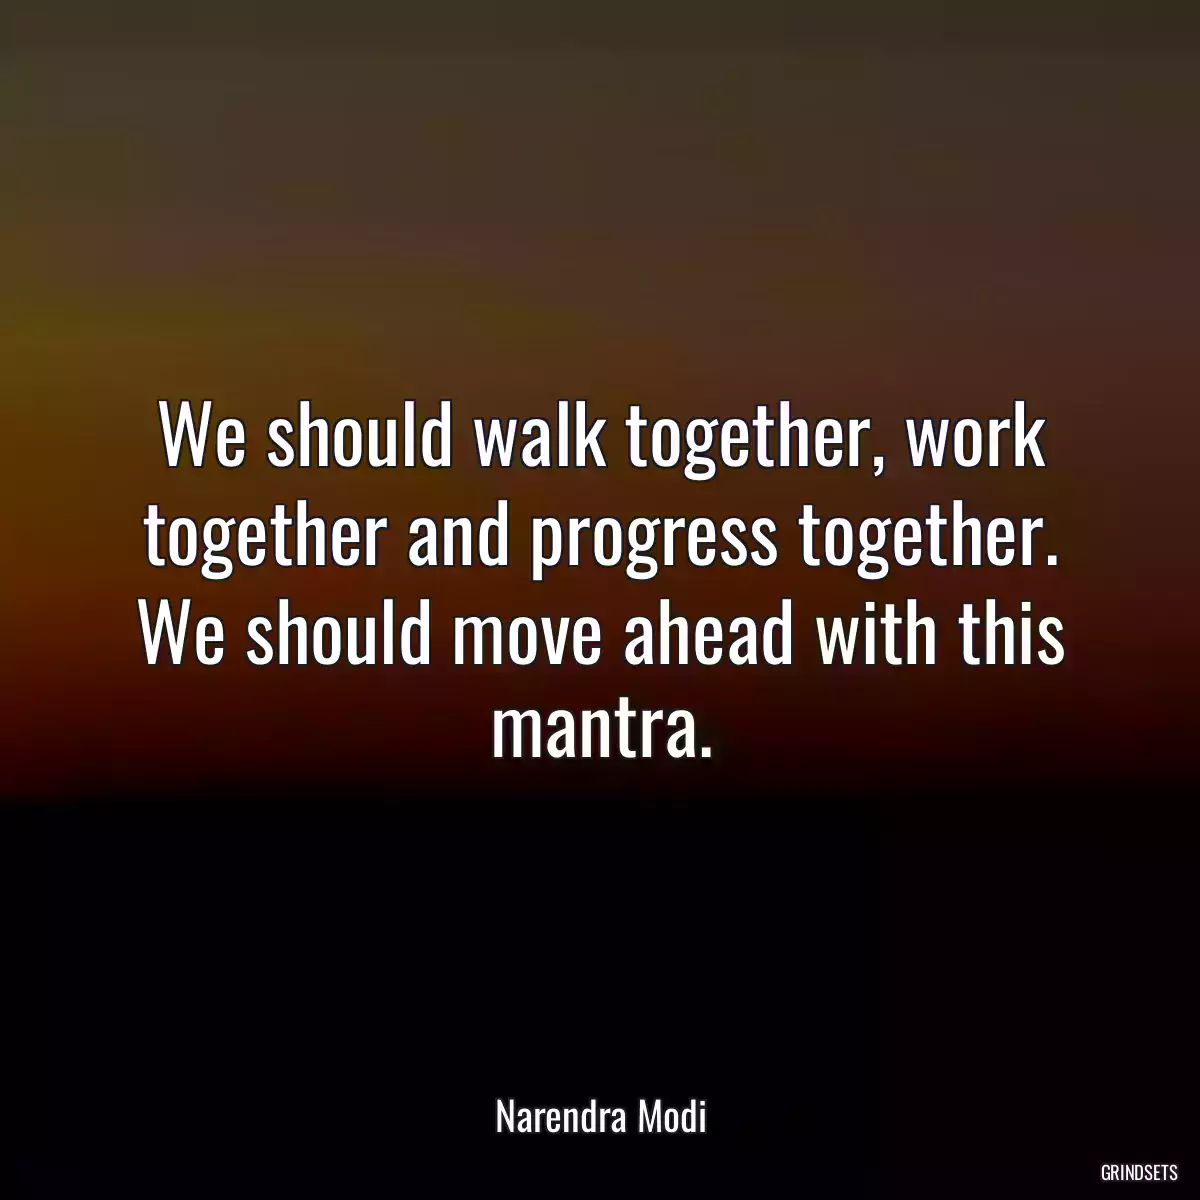 We should walk together, work together and progress together. We should move ahead with this mantra.